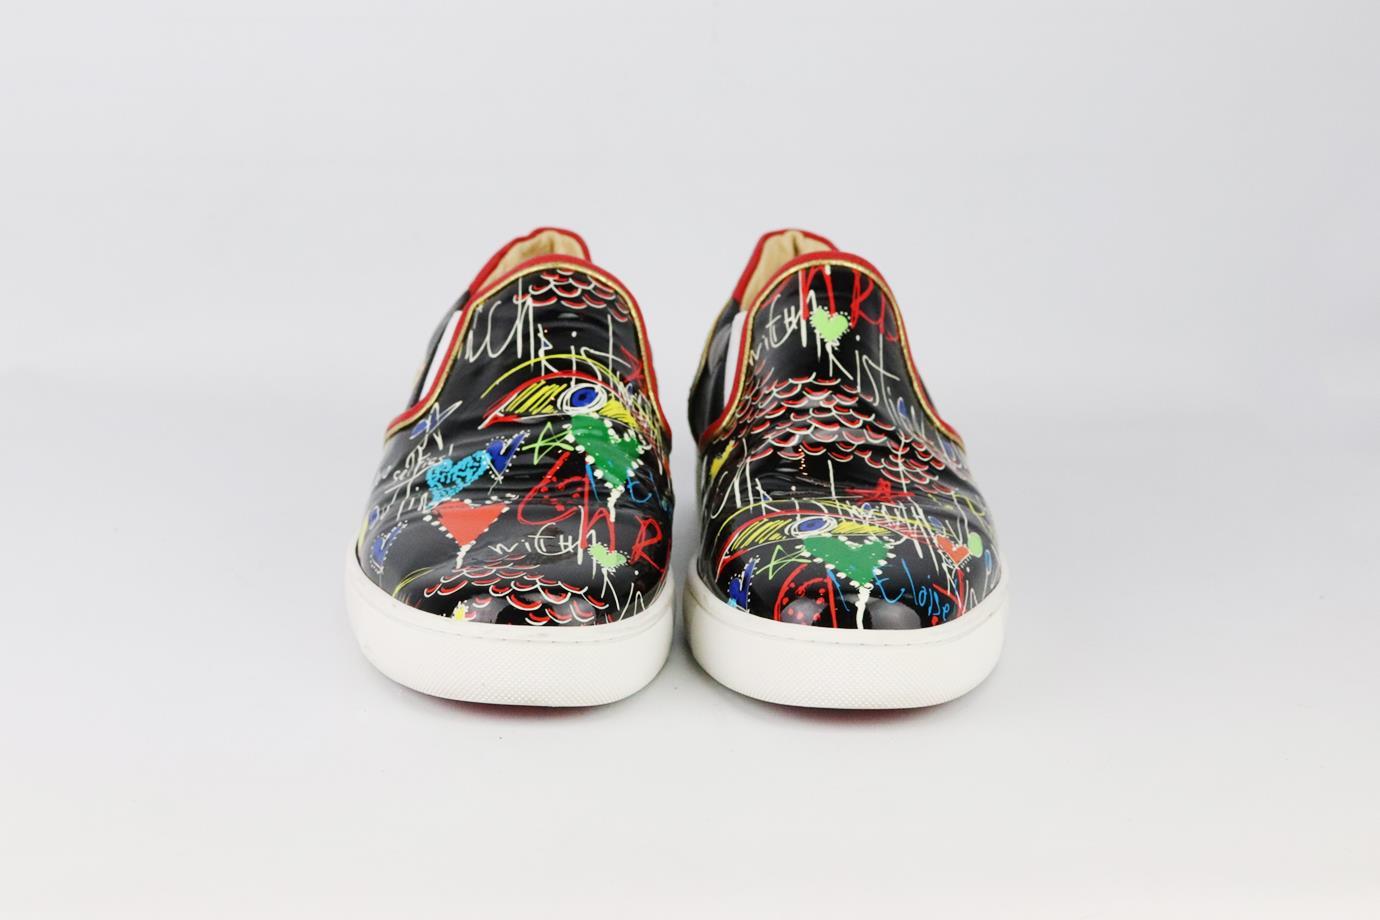 Christian Louboutin Masteralta printed patent leather slip on sneakers. Made from black and multicoloured graffiti-print in a classic slip-on sneaker style on the brand’s iconic red sole. Black, white, red and gold. Slip on. Does not come with box